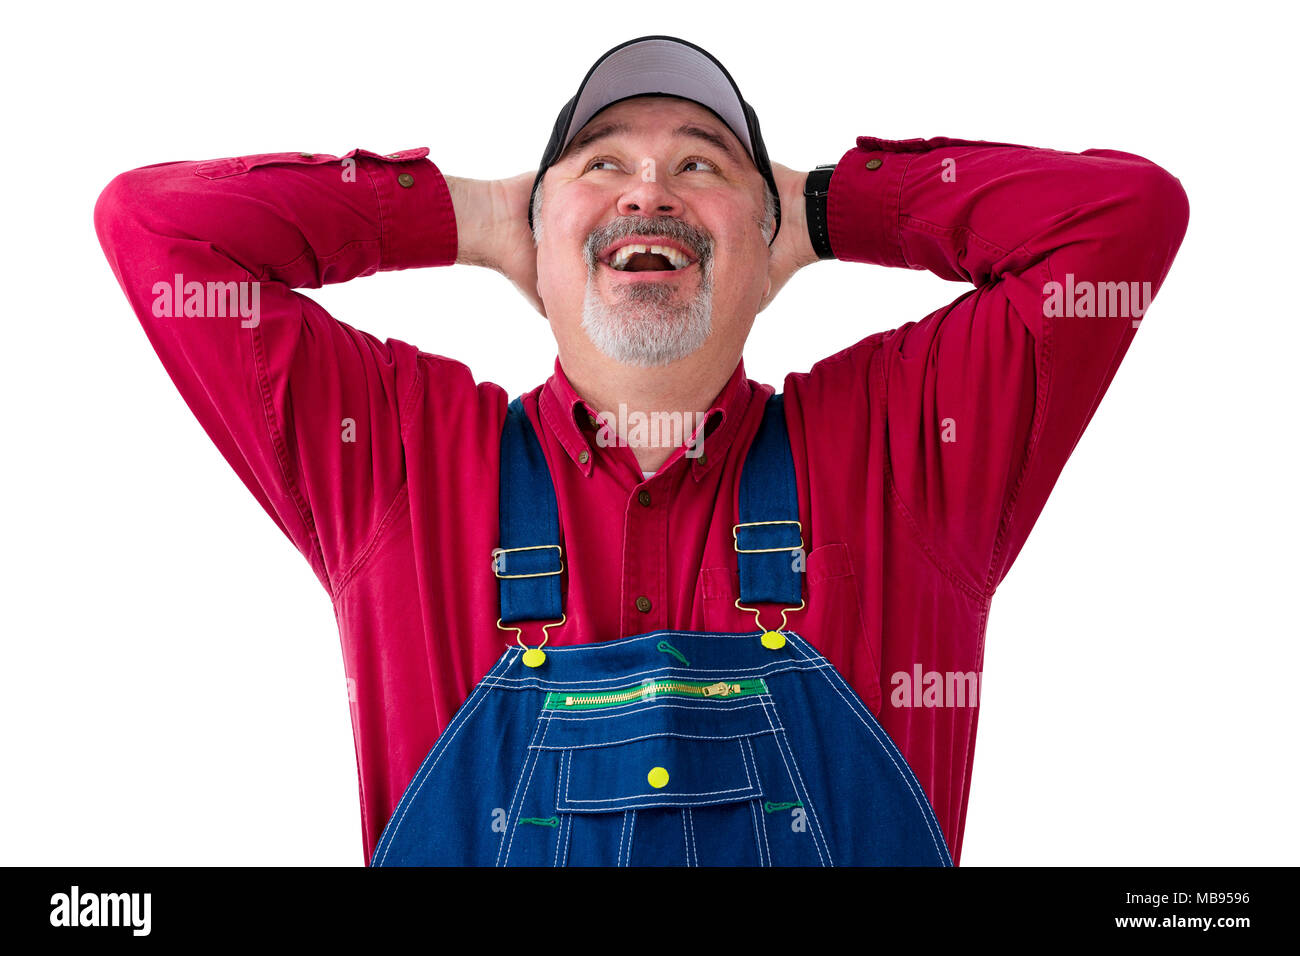 Cheerful farm worker wearing dungarees against white background Stock Photo